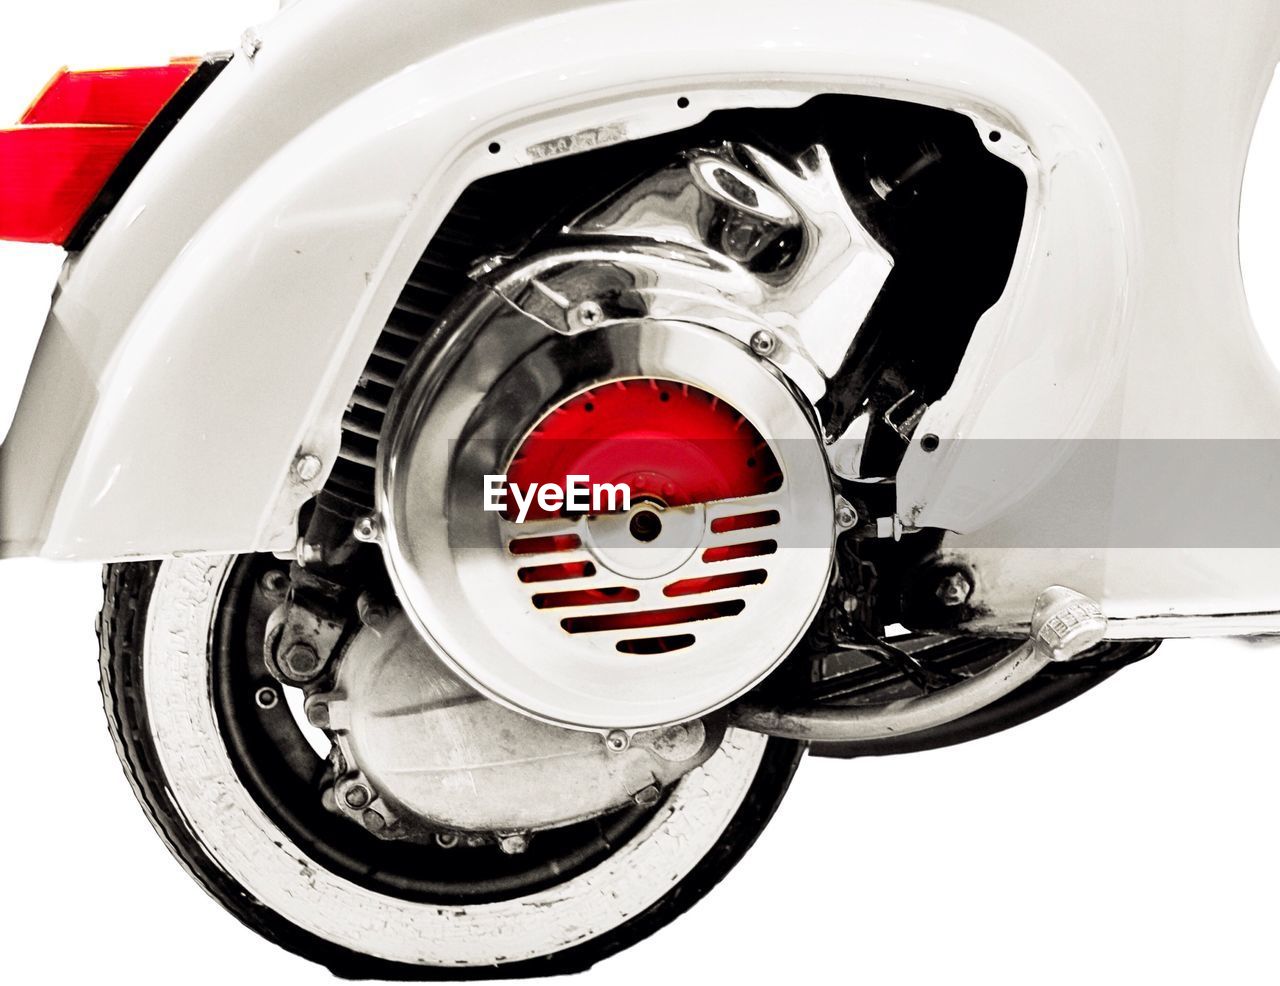 Cropped image of white scooter against white background